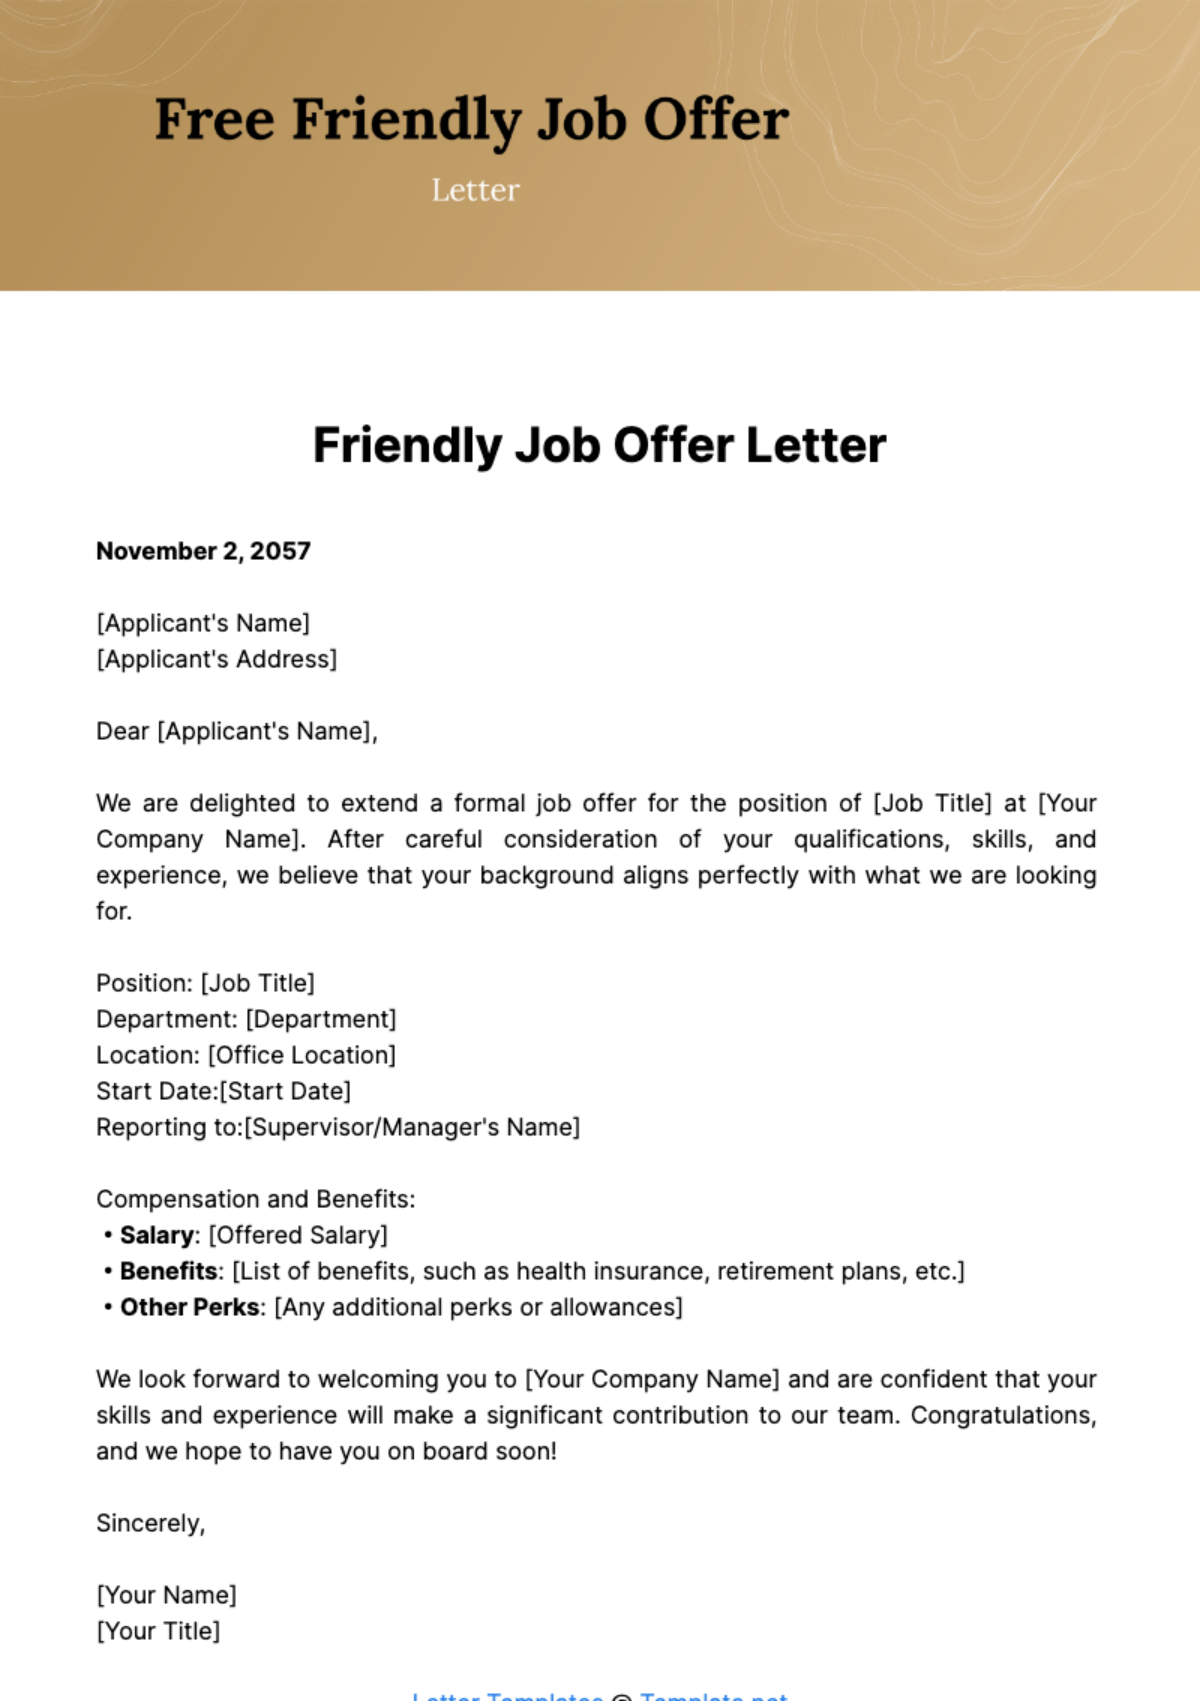 Free Friendly Job Offer Letter Template